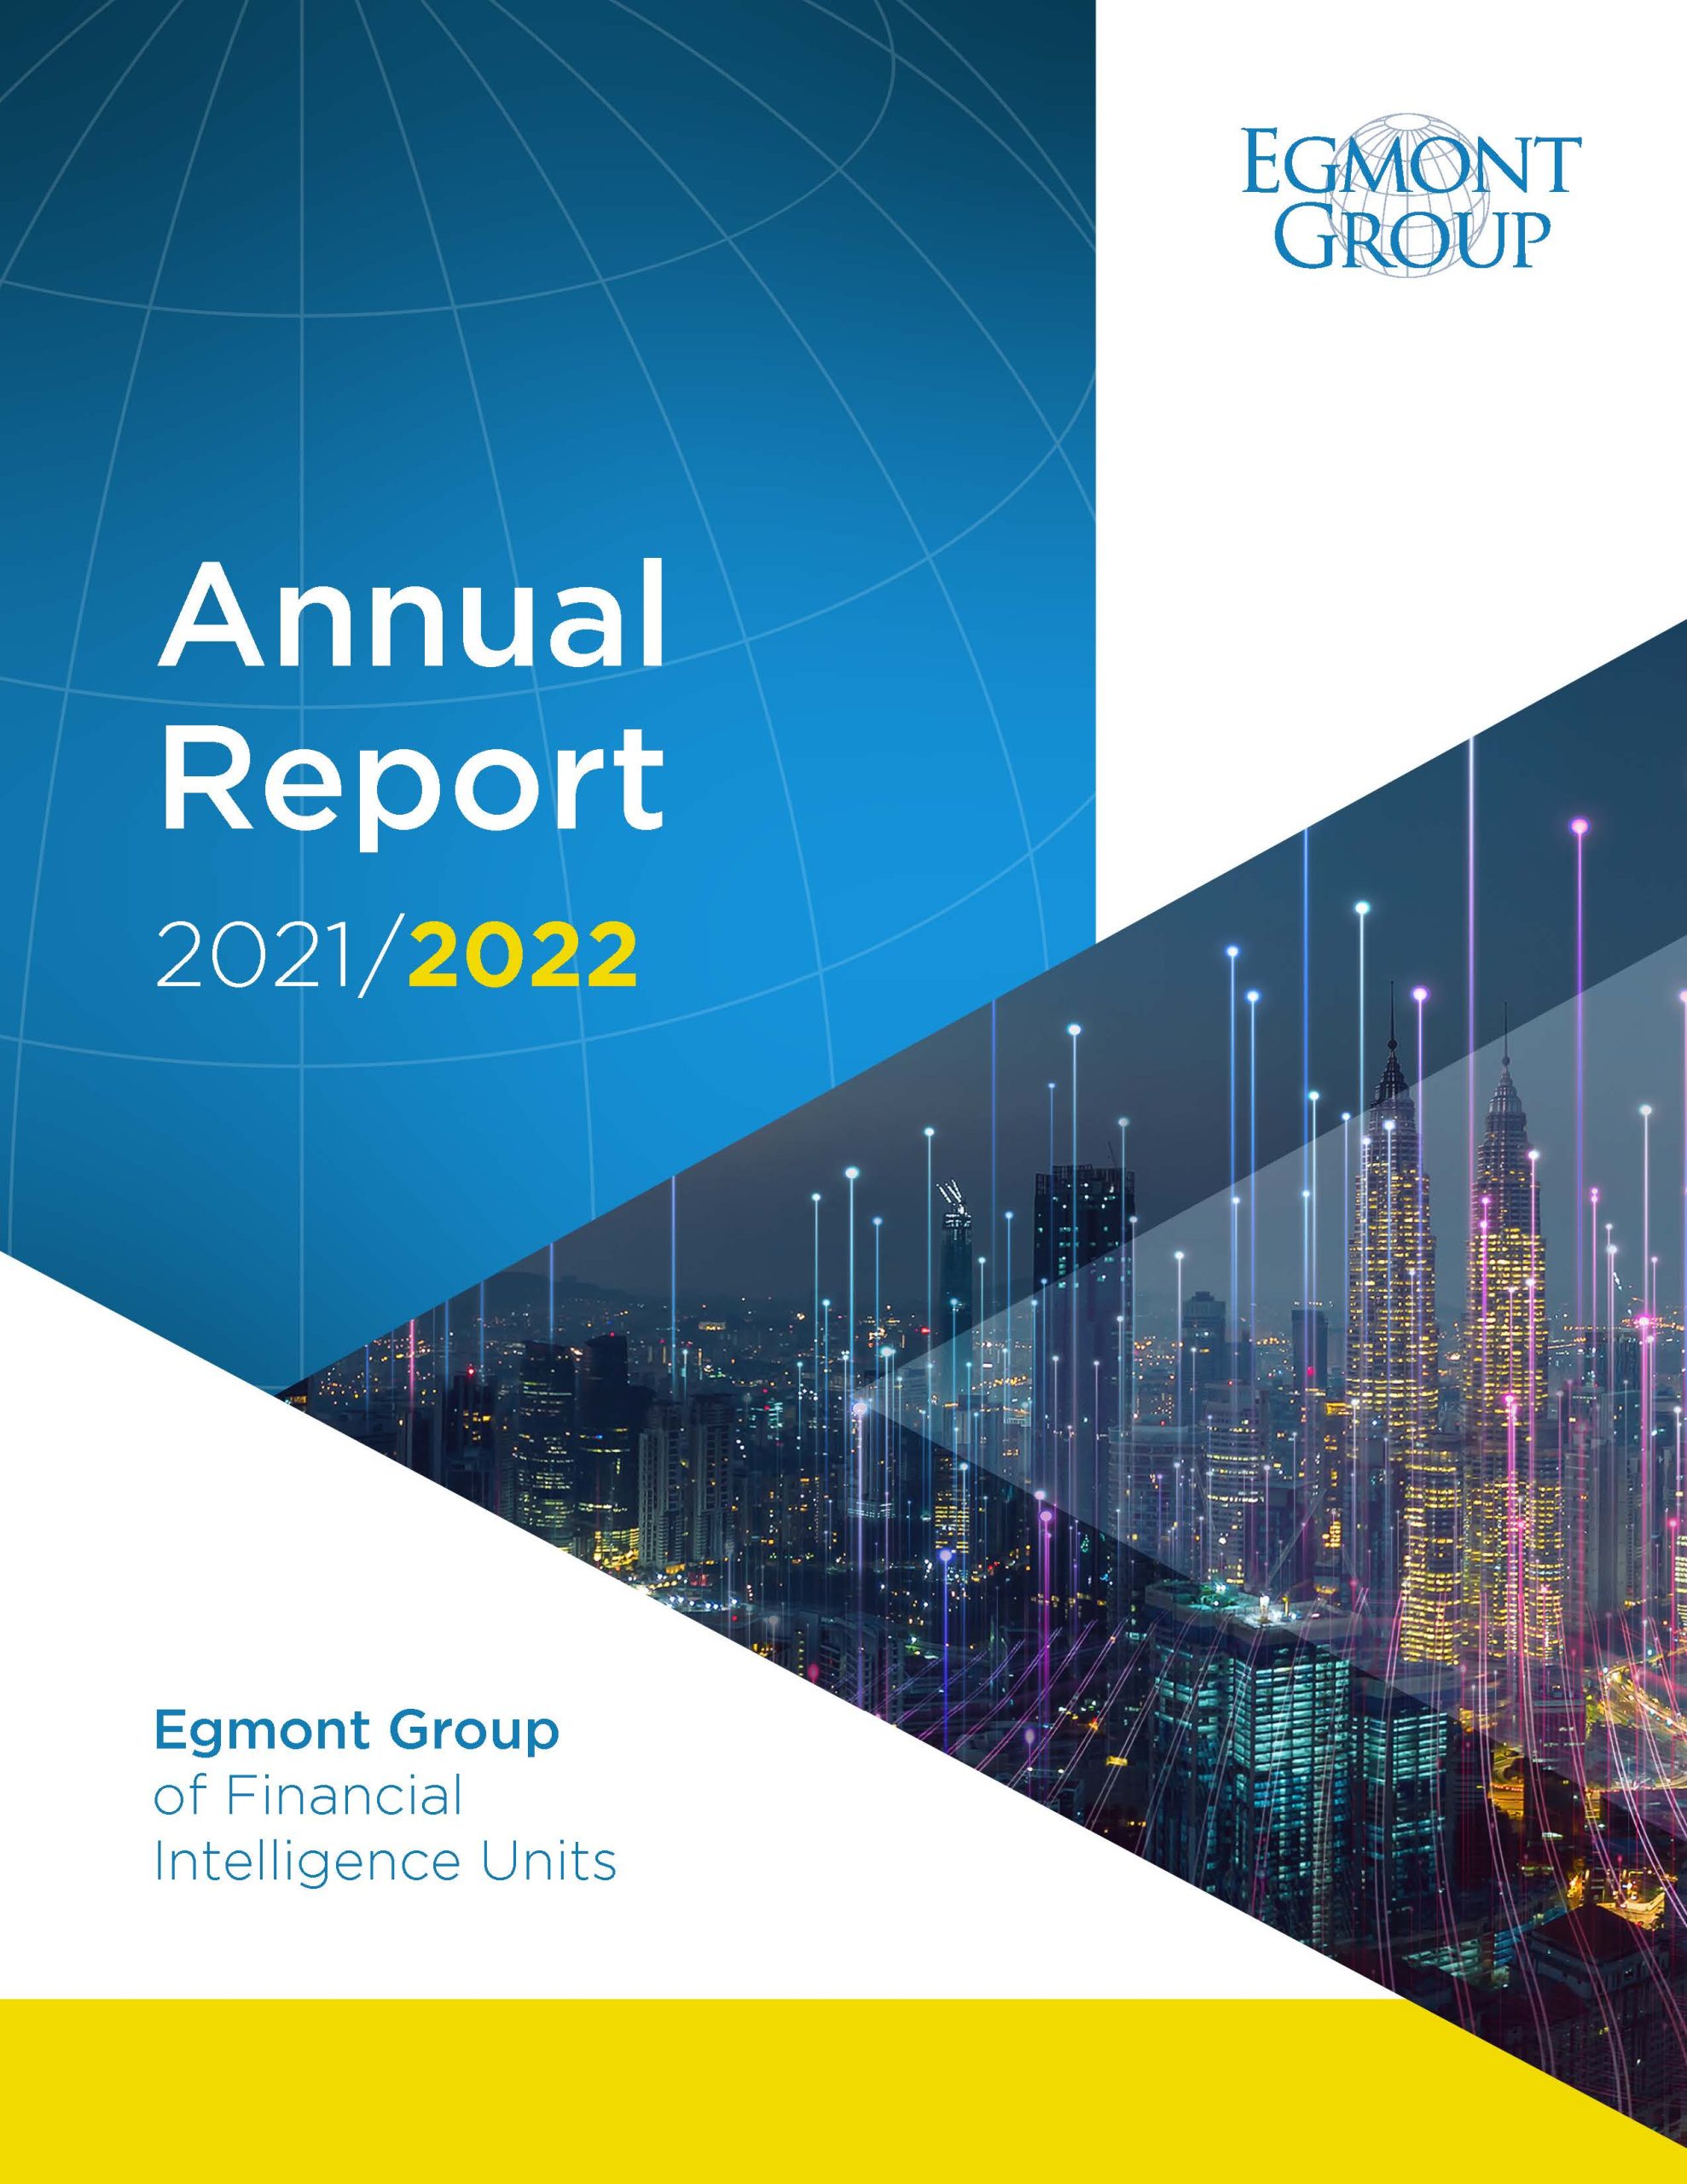 Egmont Group Annual Report 2021-2022